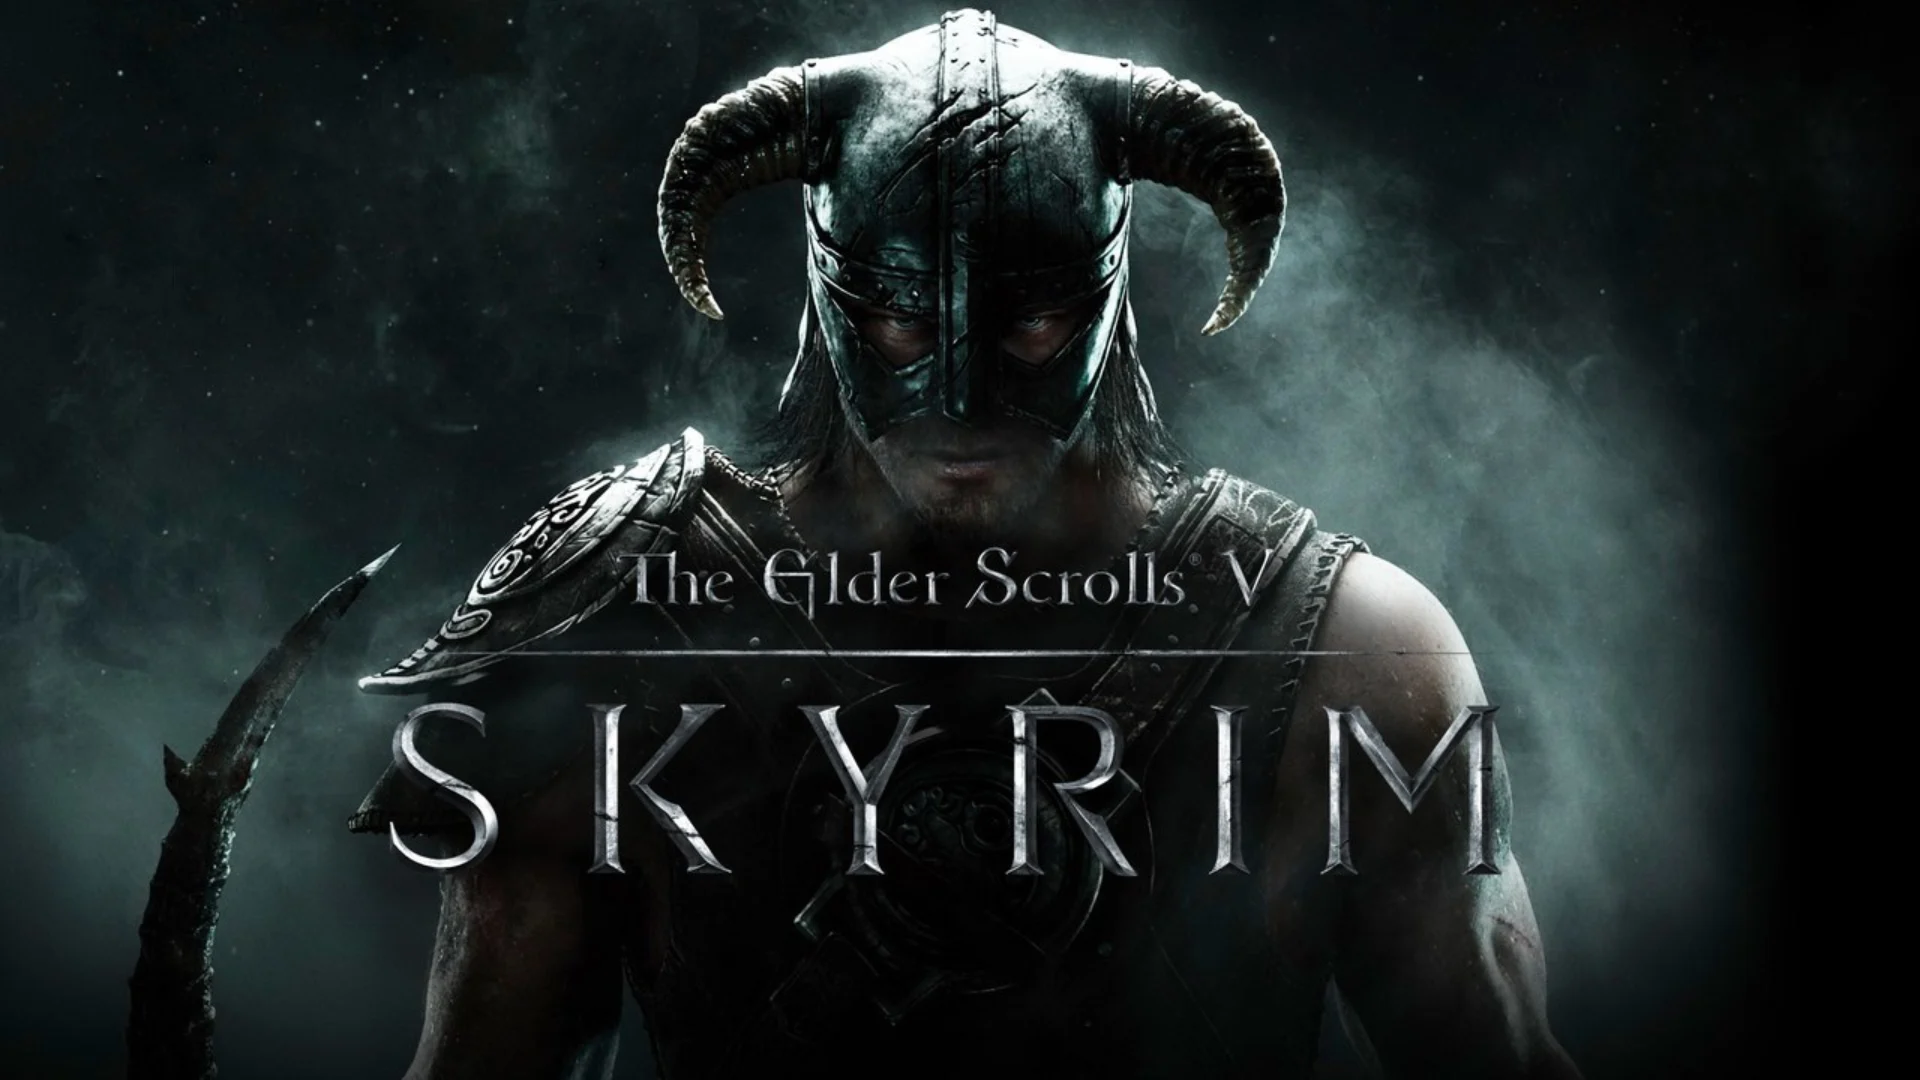 Bethesda Game Studios Creations Launches in Skyrim - Insider Gaming